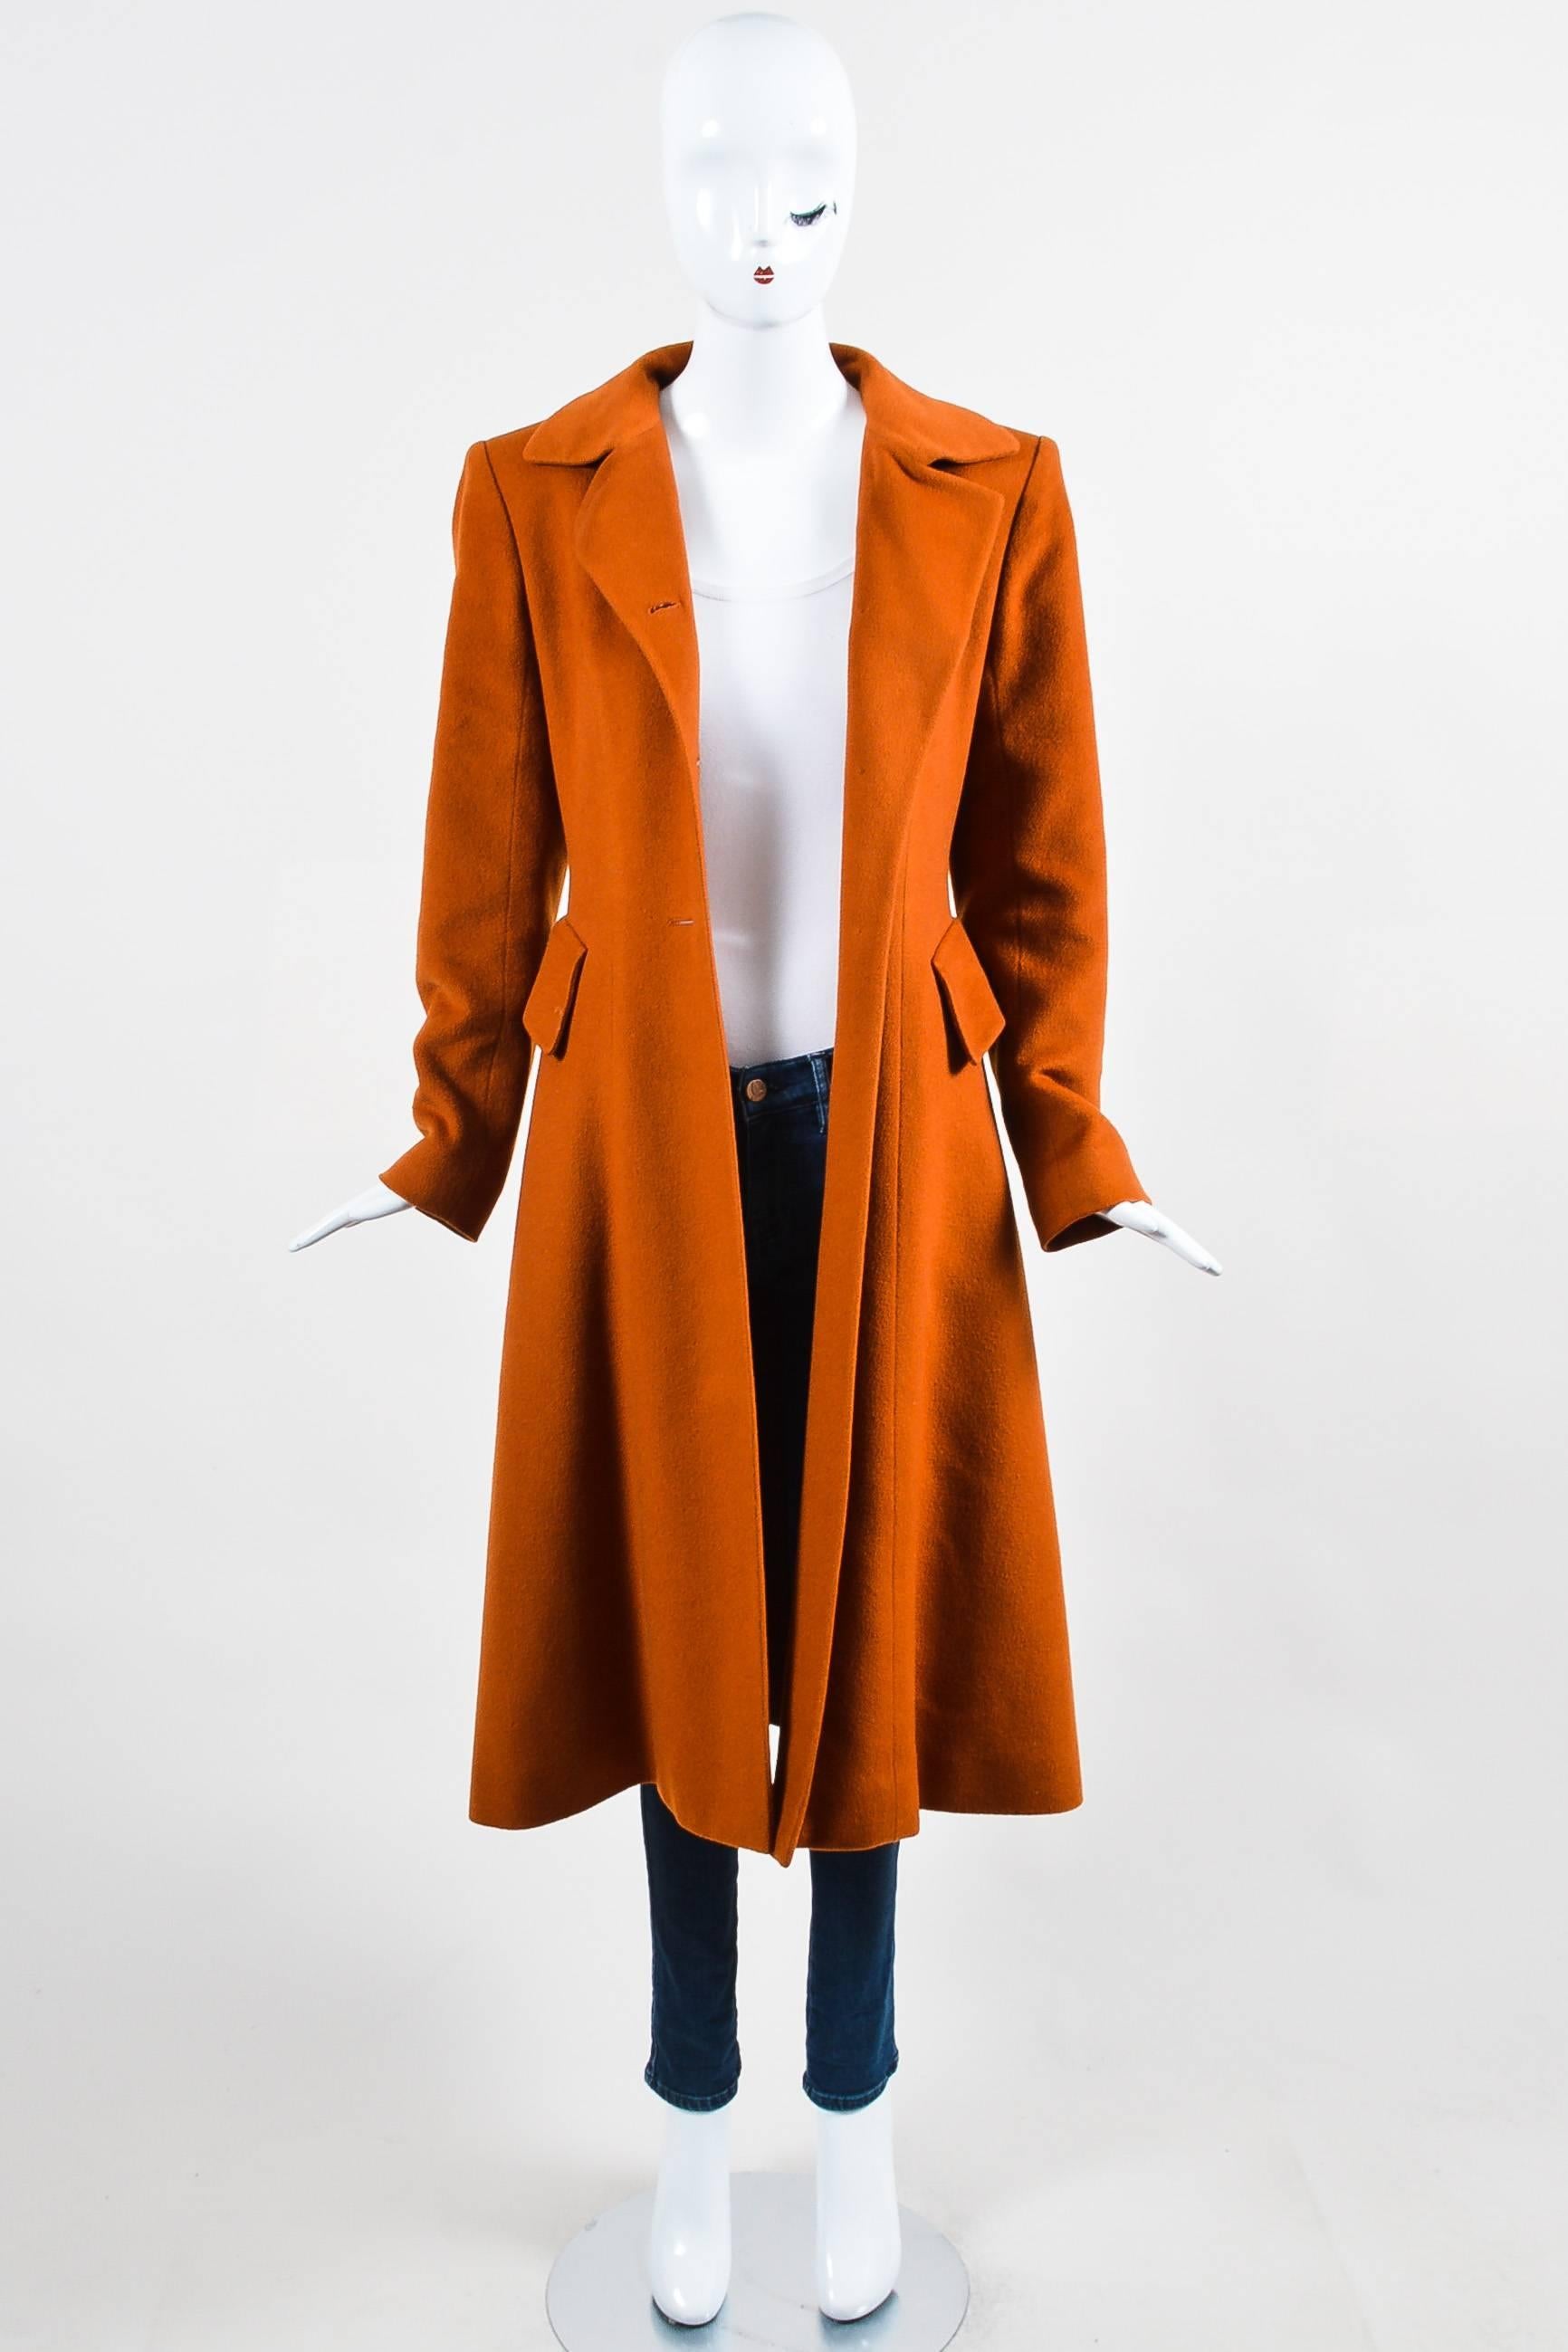 Ladylike overcoat constructed of burnt orange cashmere. Fitted silhouette flares away from the body below waist. Buttons down the front subtly feature the Hermes horse and equestrian. Inset pockets at sides seams with slanted flaps. Tab and hook at